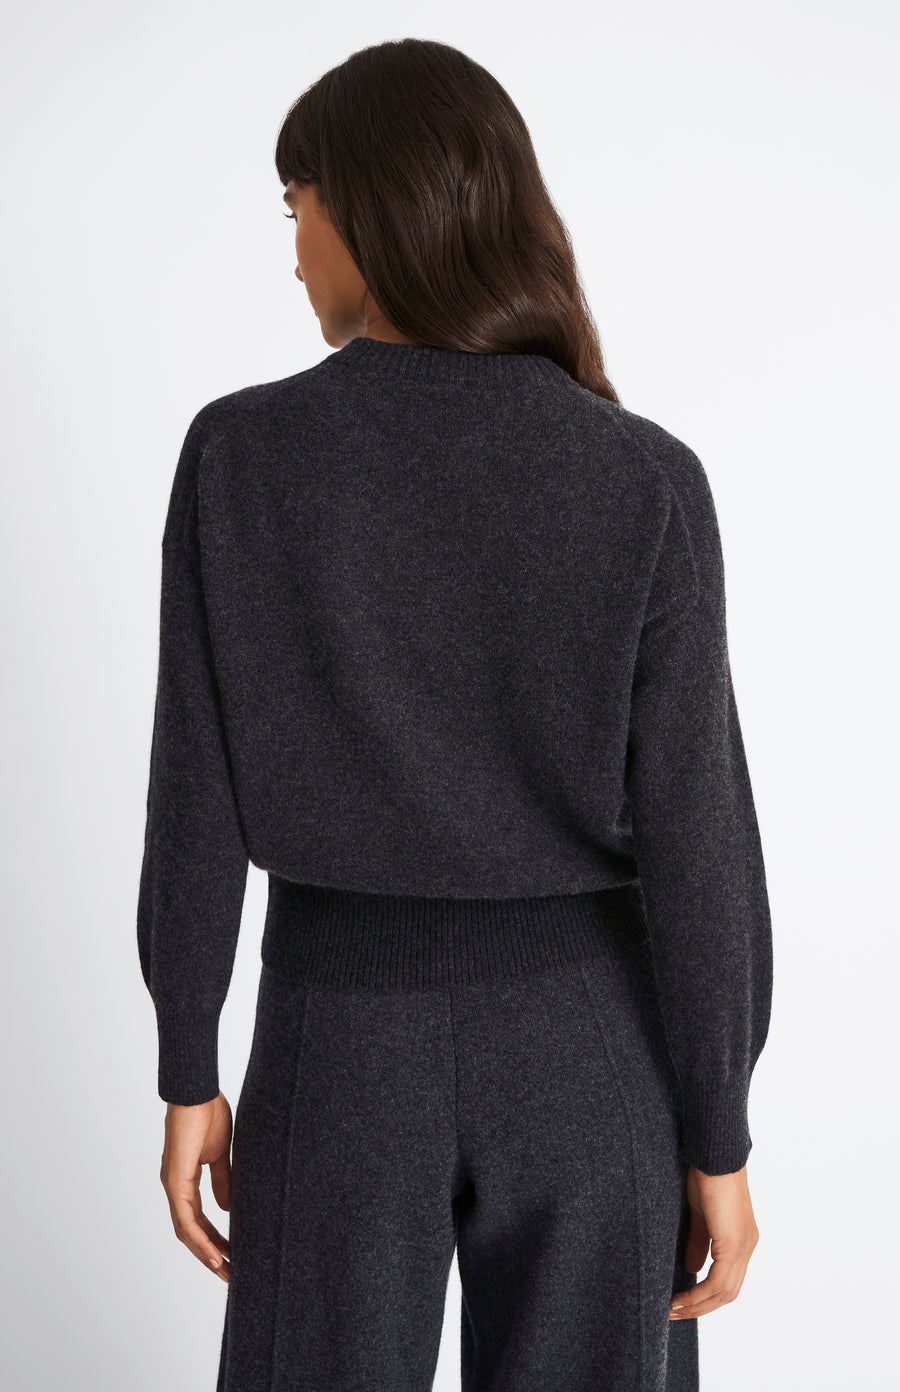  Pringle of Scotland Women's Lightweight Cashmere Jumper in Charcoal rear view